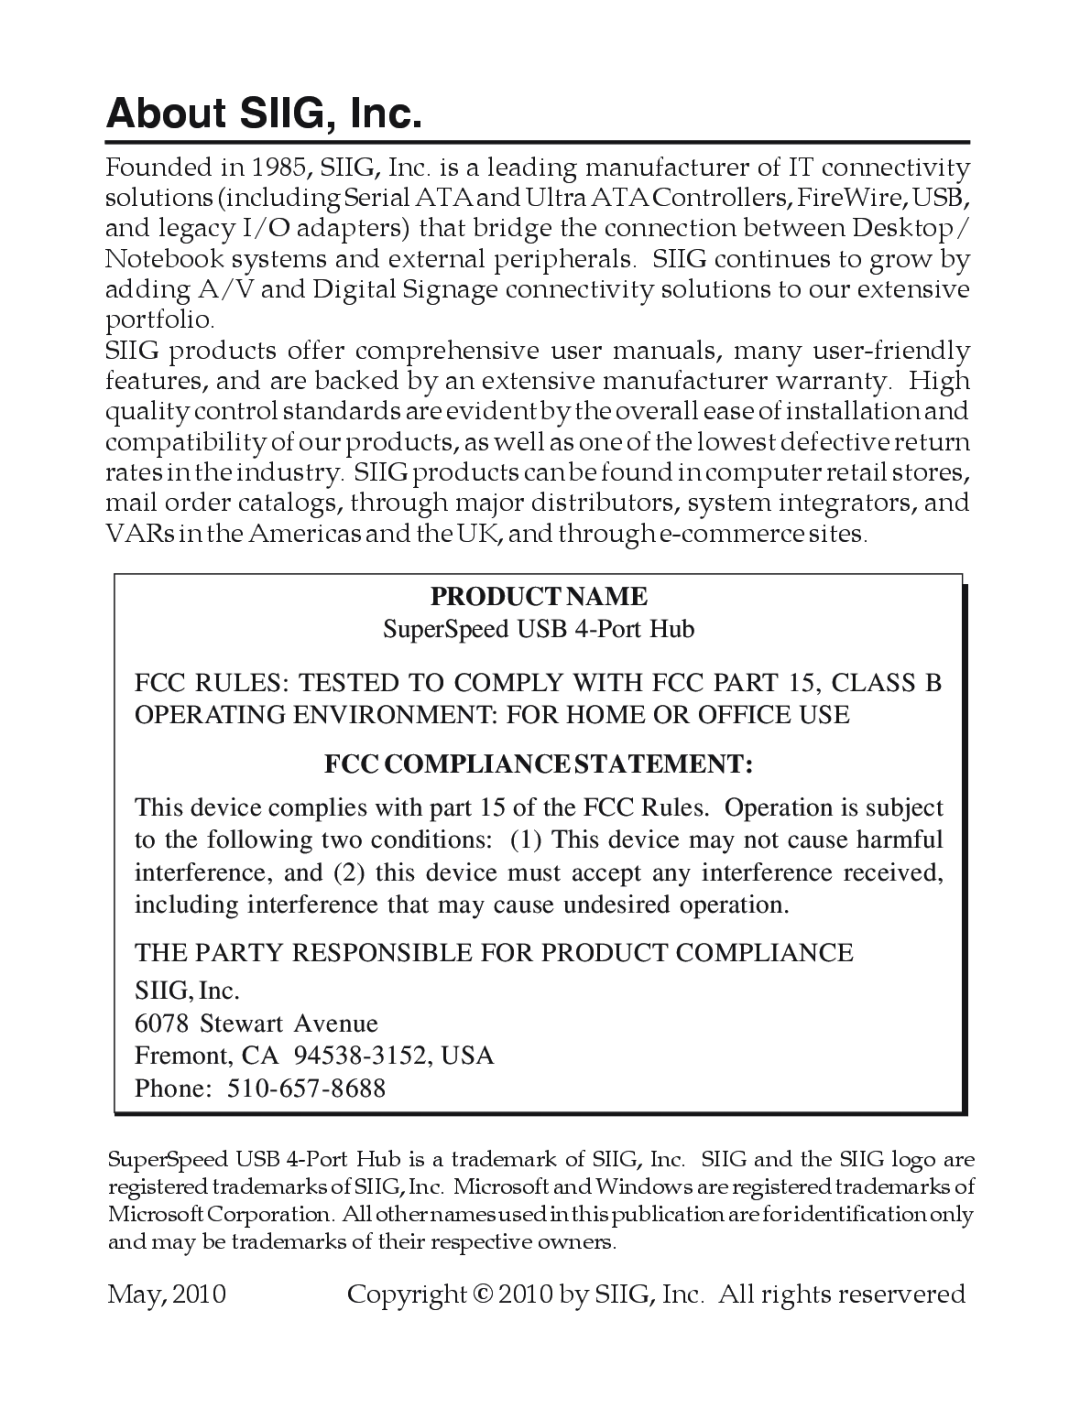 SIIG 04-0625A manual About SIIG, Inc, Product Name, Fcc Compliance Statement 